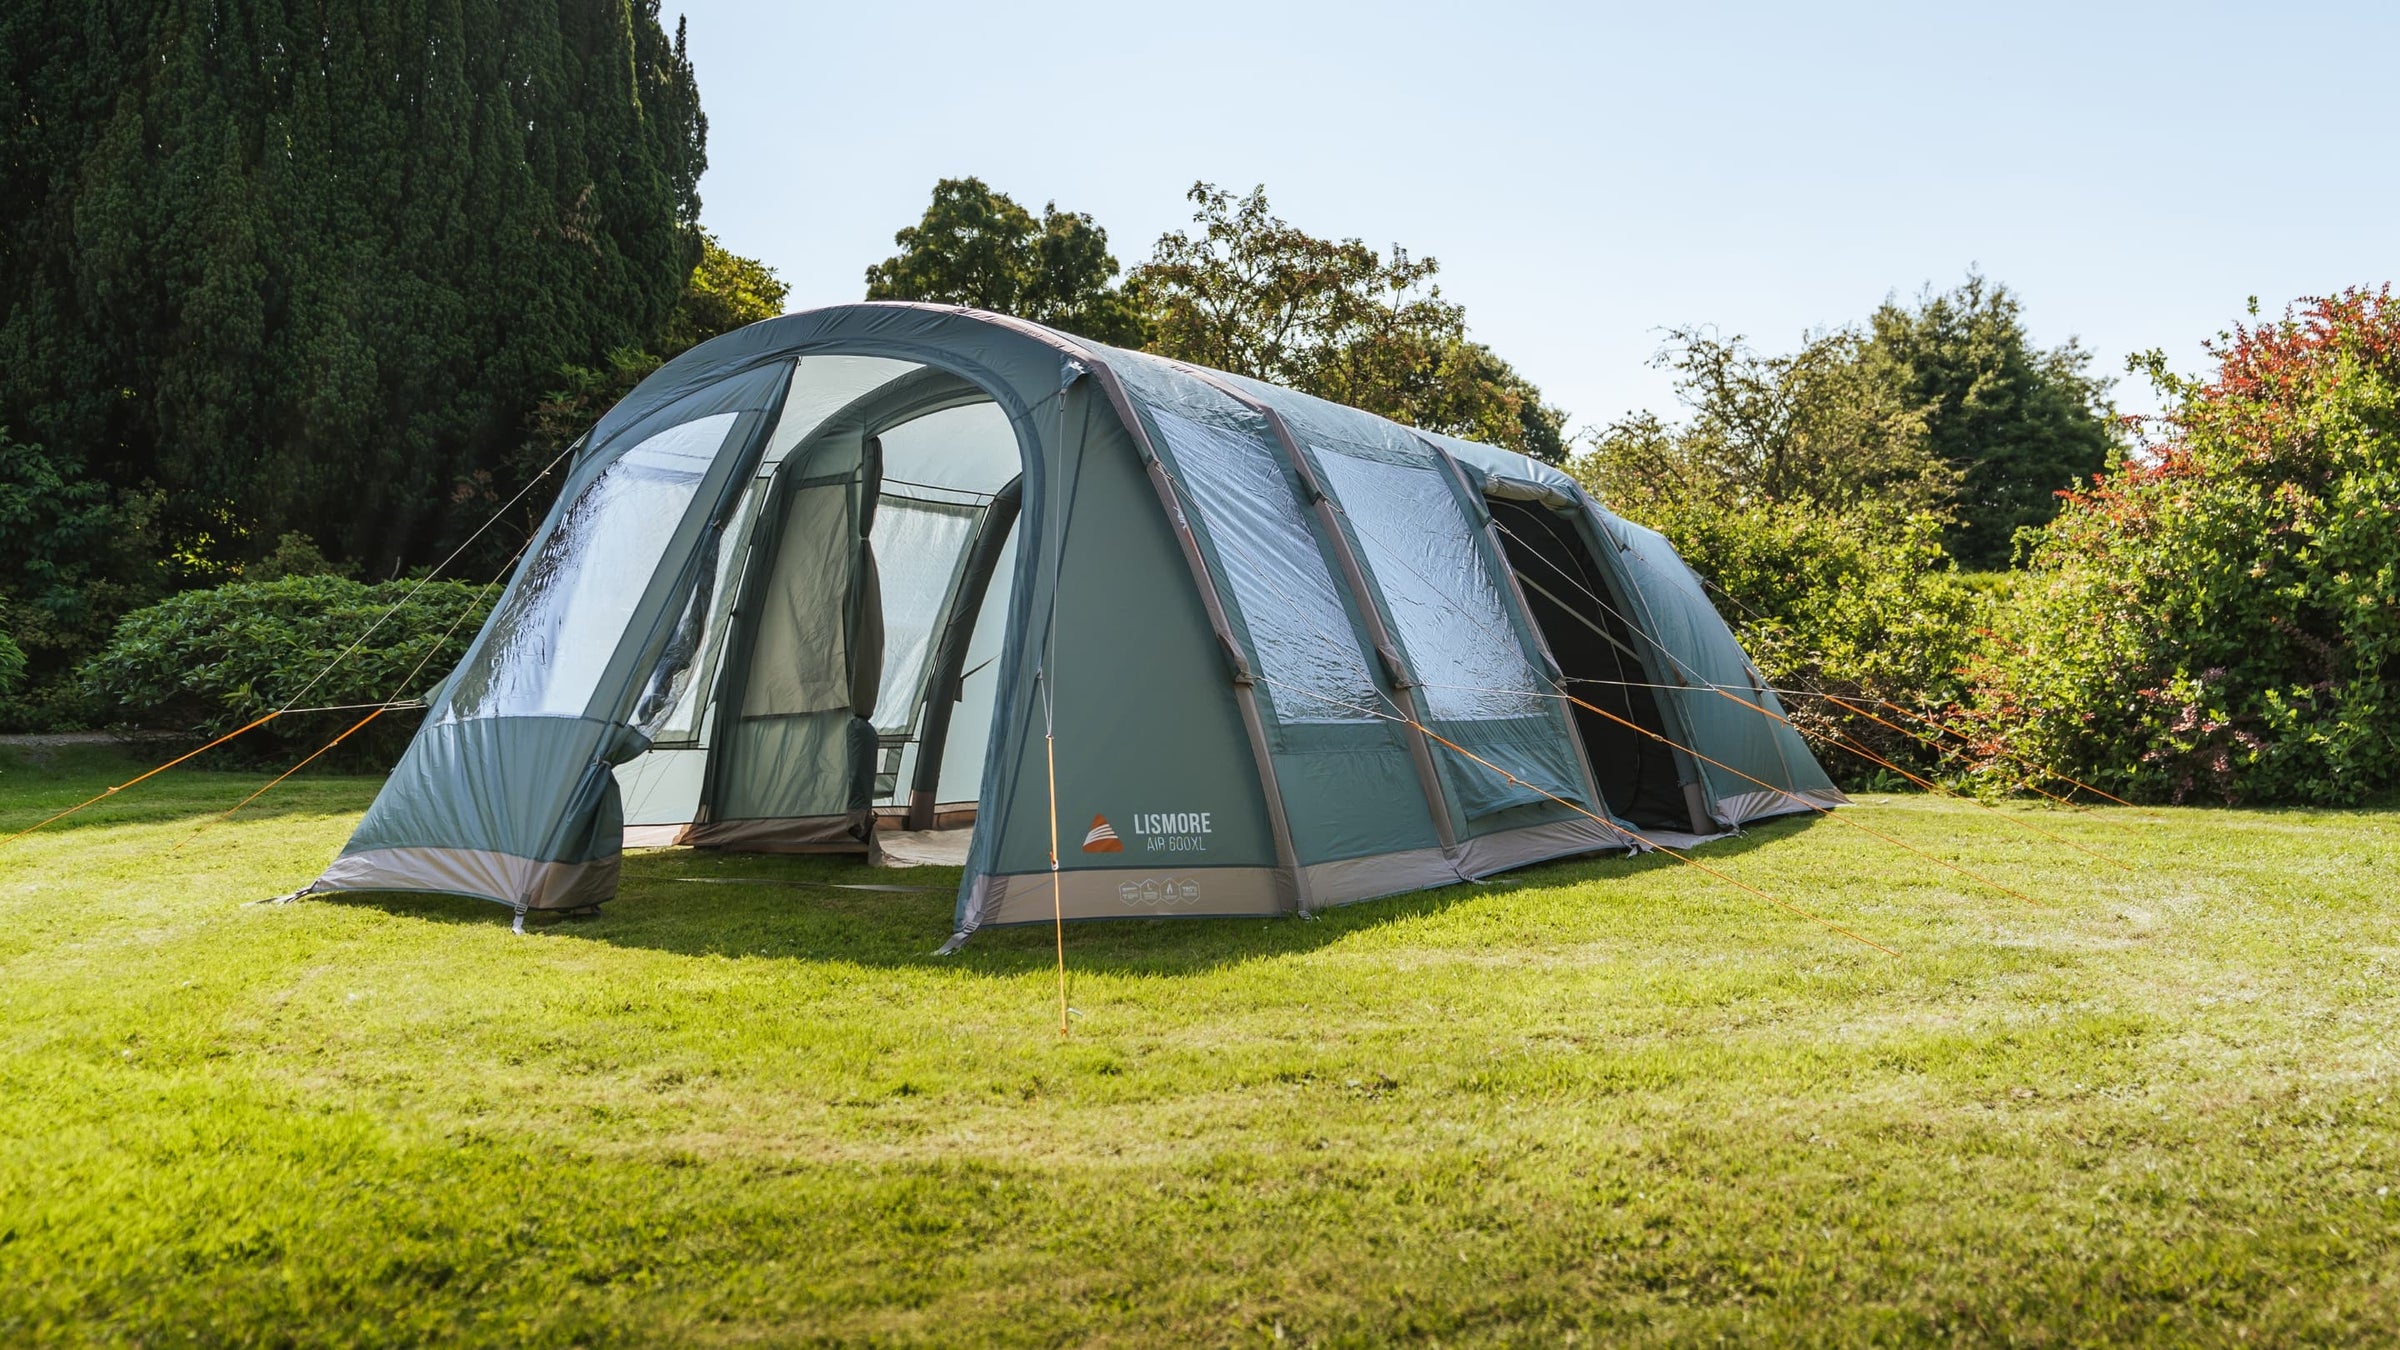 Inflatable Air Tents from Major Brands Vango AirBeam, Kampa and Outdoor Revolution